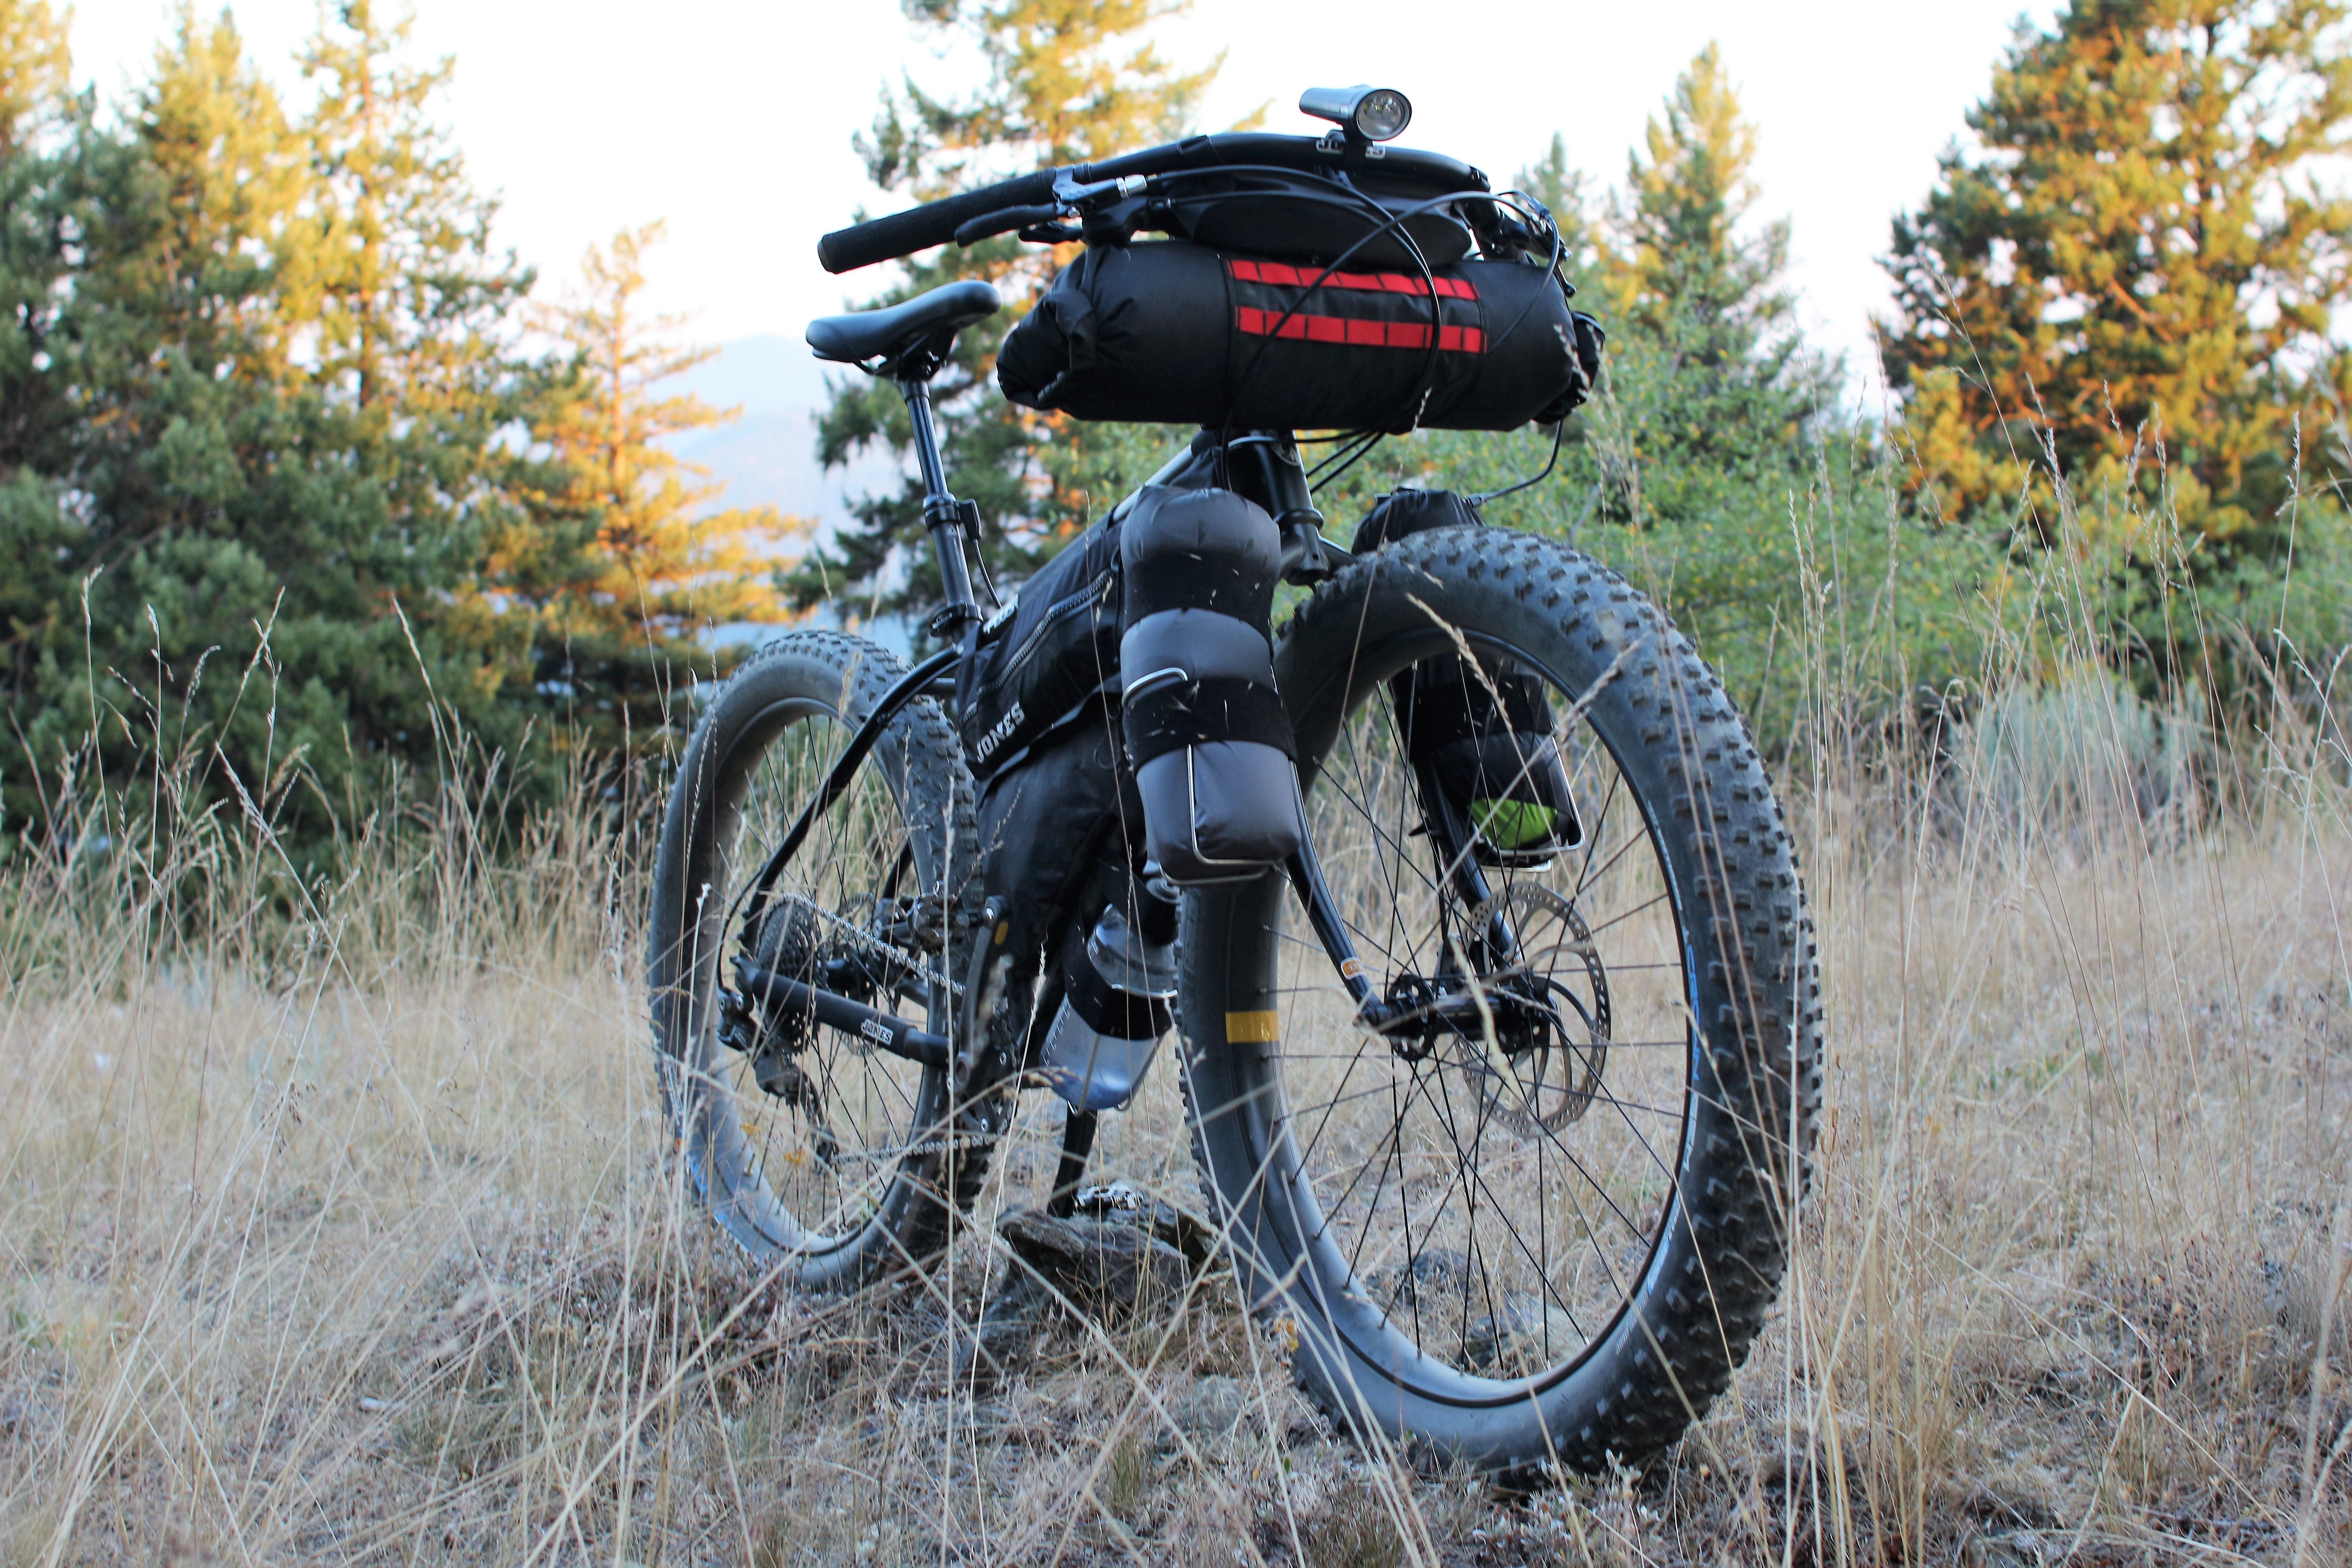 You are currently viewing Overnight Ride in Southern Oregon With my Jones Plus SWB Complete Bike